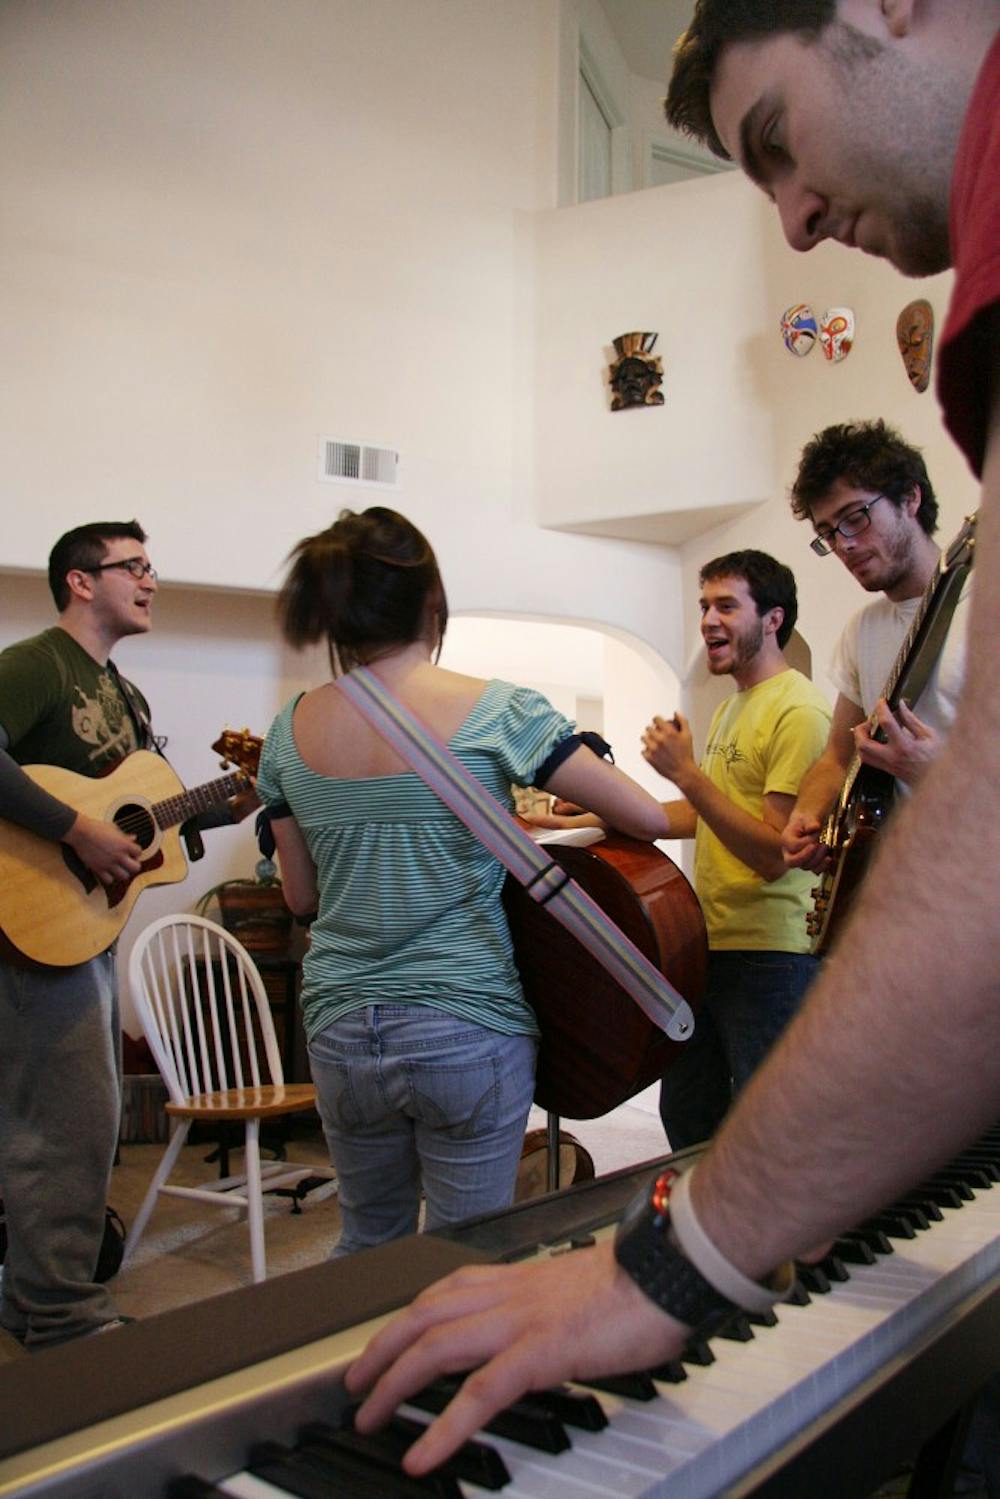 	From left, Mike Mares, Michelle Baumann, Jesse Herrera, Greg Pisotti, and Josh Herrera rehearse a song, on Saturday, during an all-day writing and practicing session for their band The Noms. The band won UNM’s Battle of the Bands in 2009.